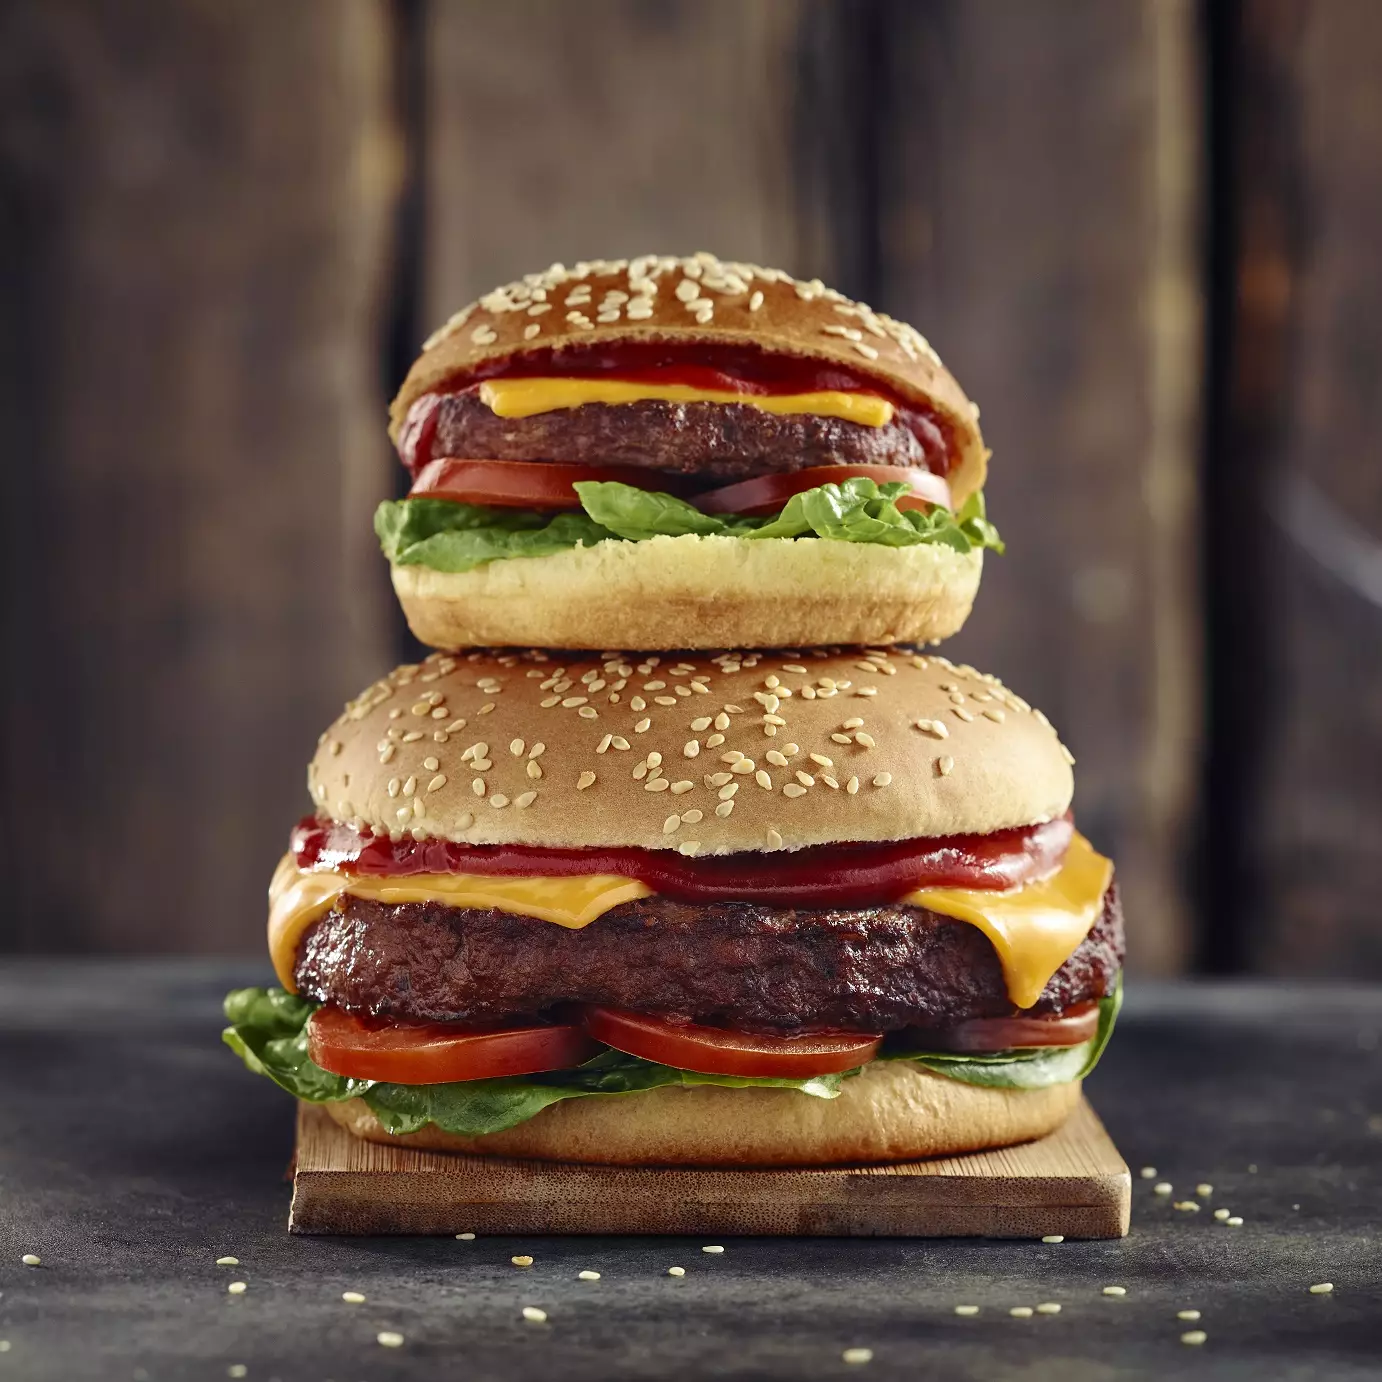 Iceland's new burger is twice the size of your regular quarter pounder.